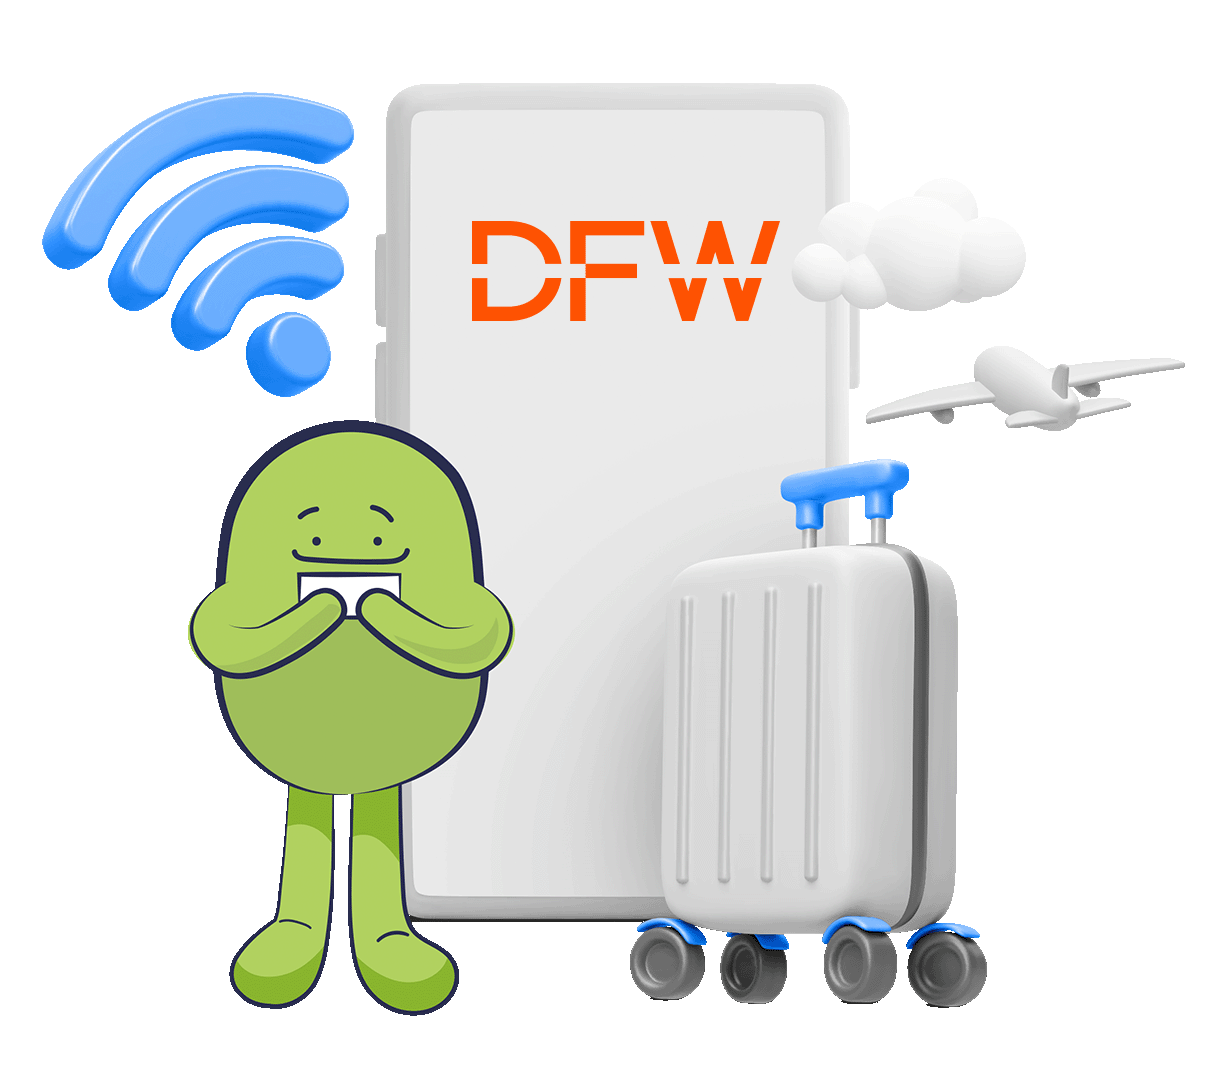 Connect to DFW Airport WiFi